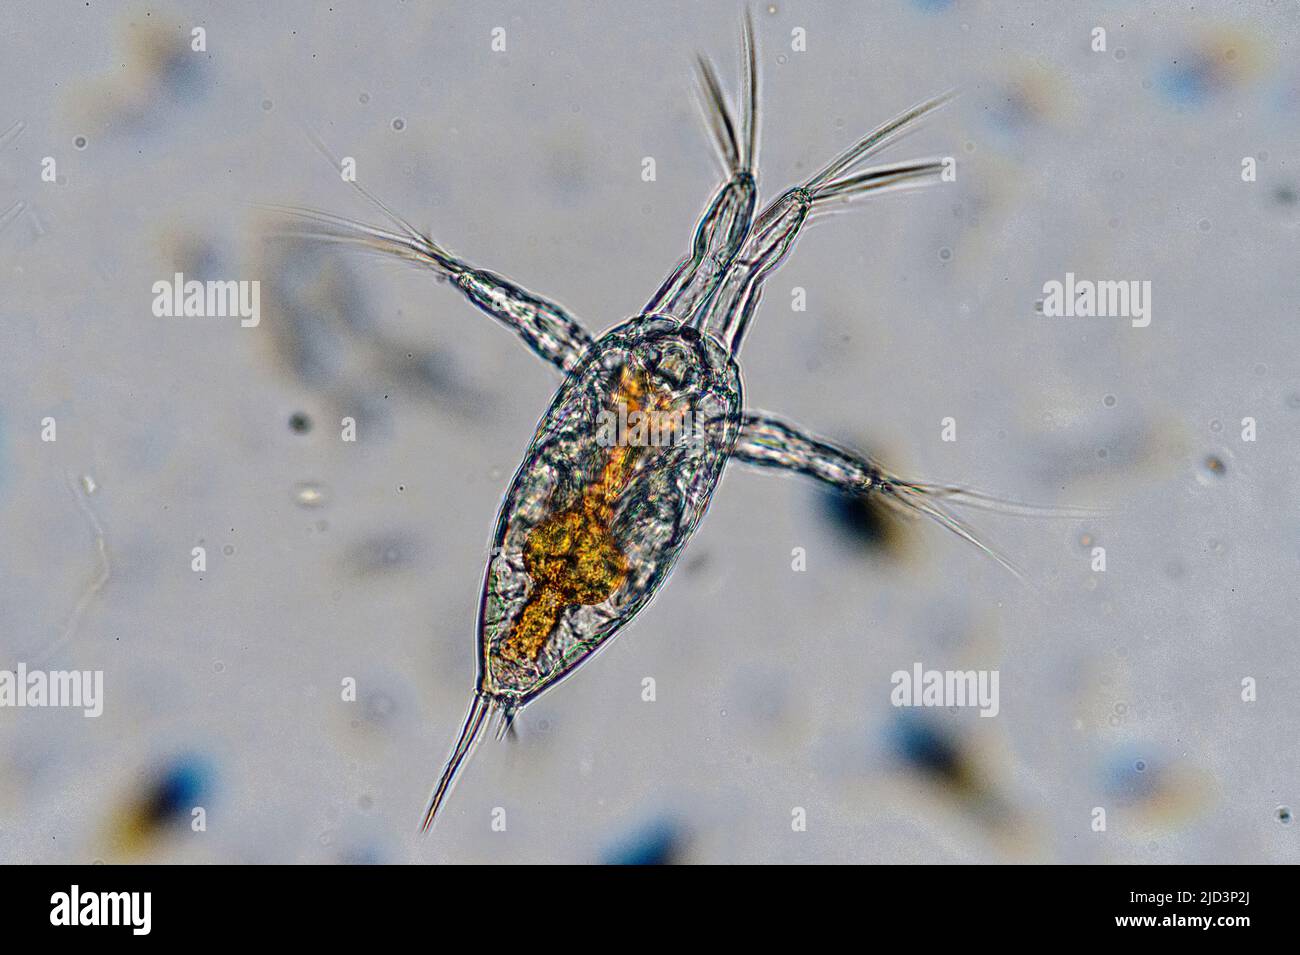 The nauplius larva of a Calanoid Copepod collected from coastal surface water of south-western Norway. Stock Photo